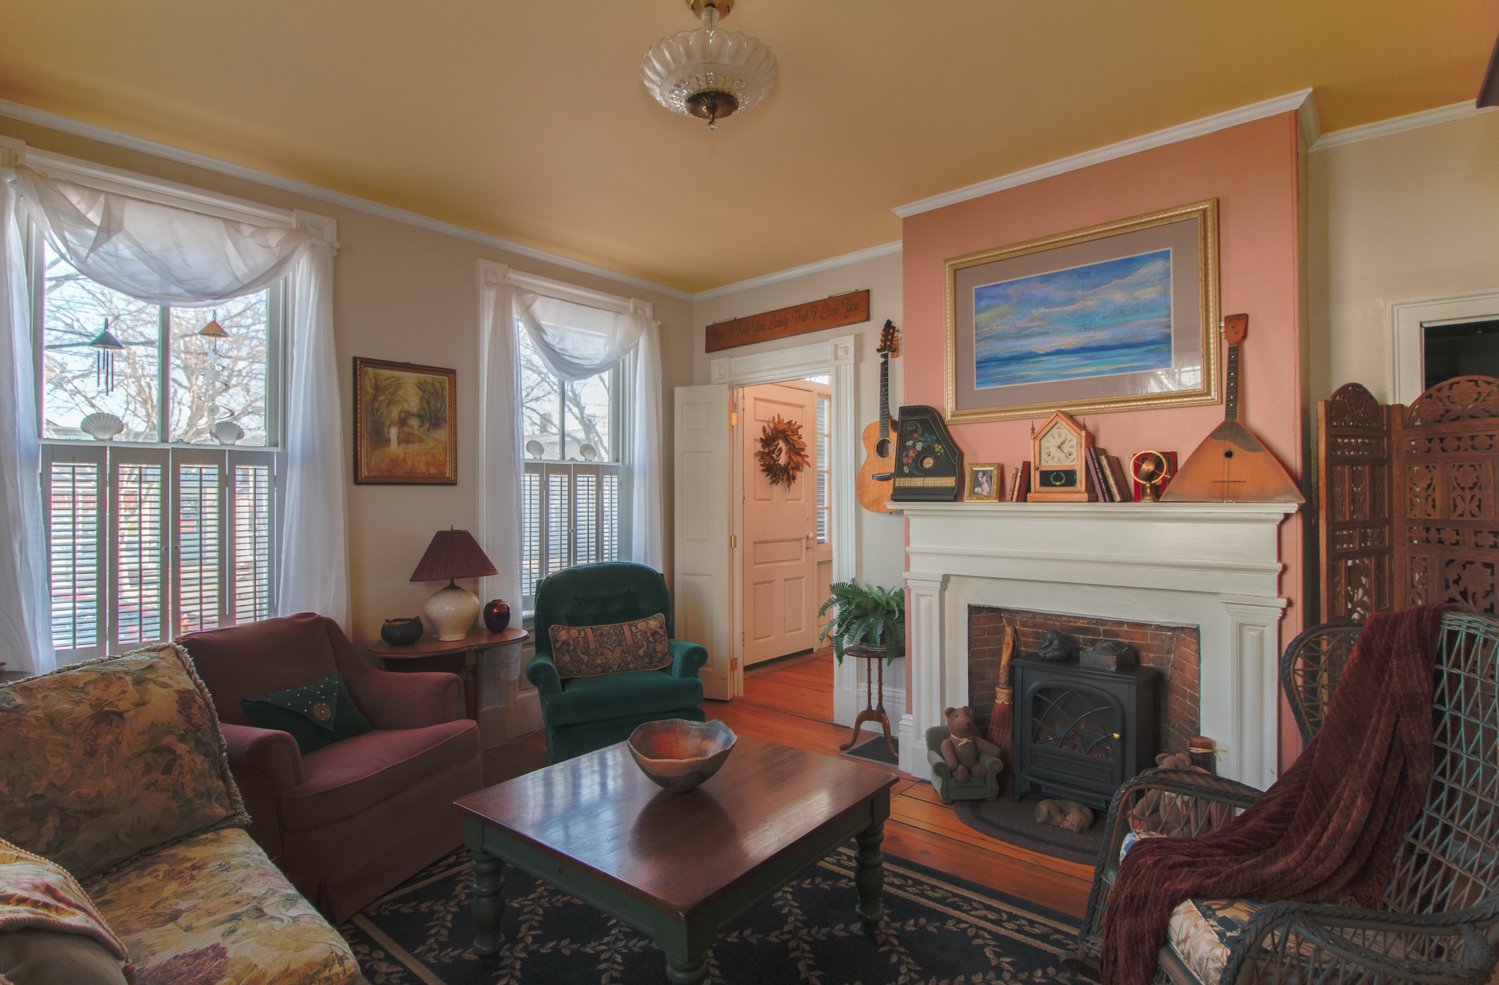 The narrow wall above the fireplace, painted a muted salmon, provides a striking backdrop for the seascape painting while connecting with the floors below